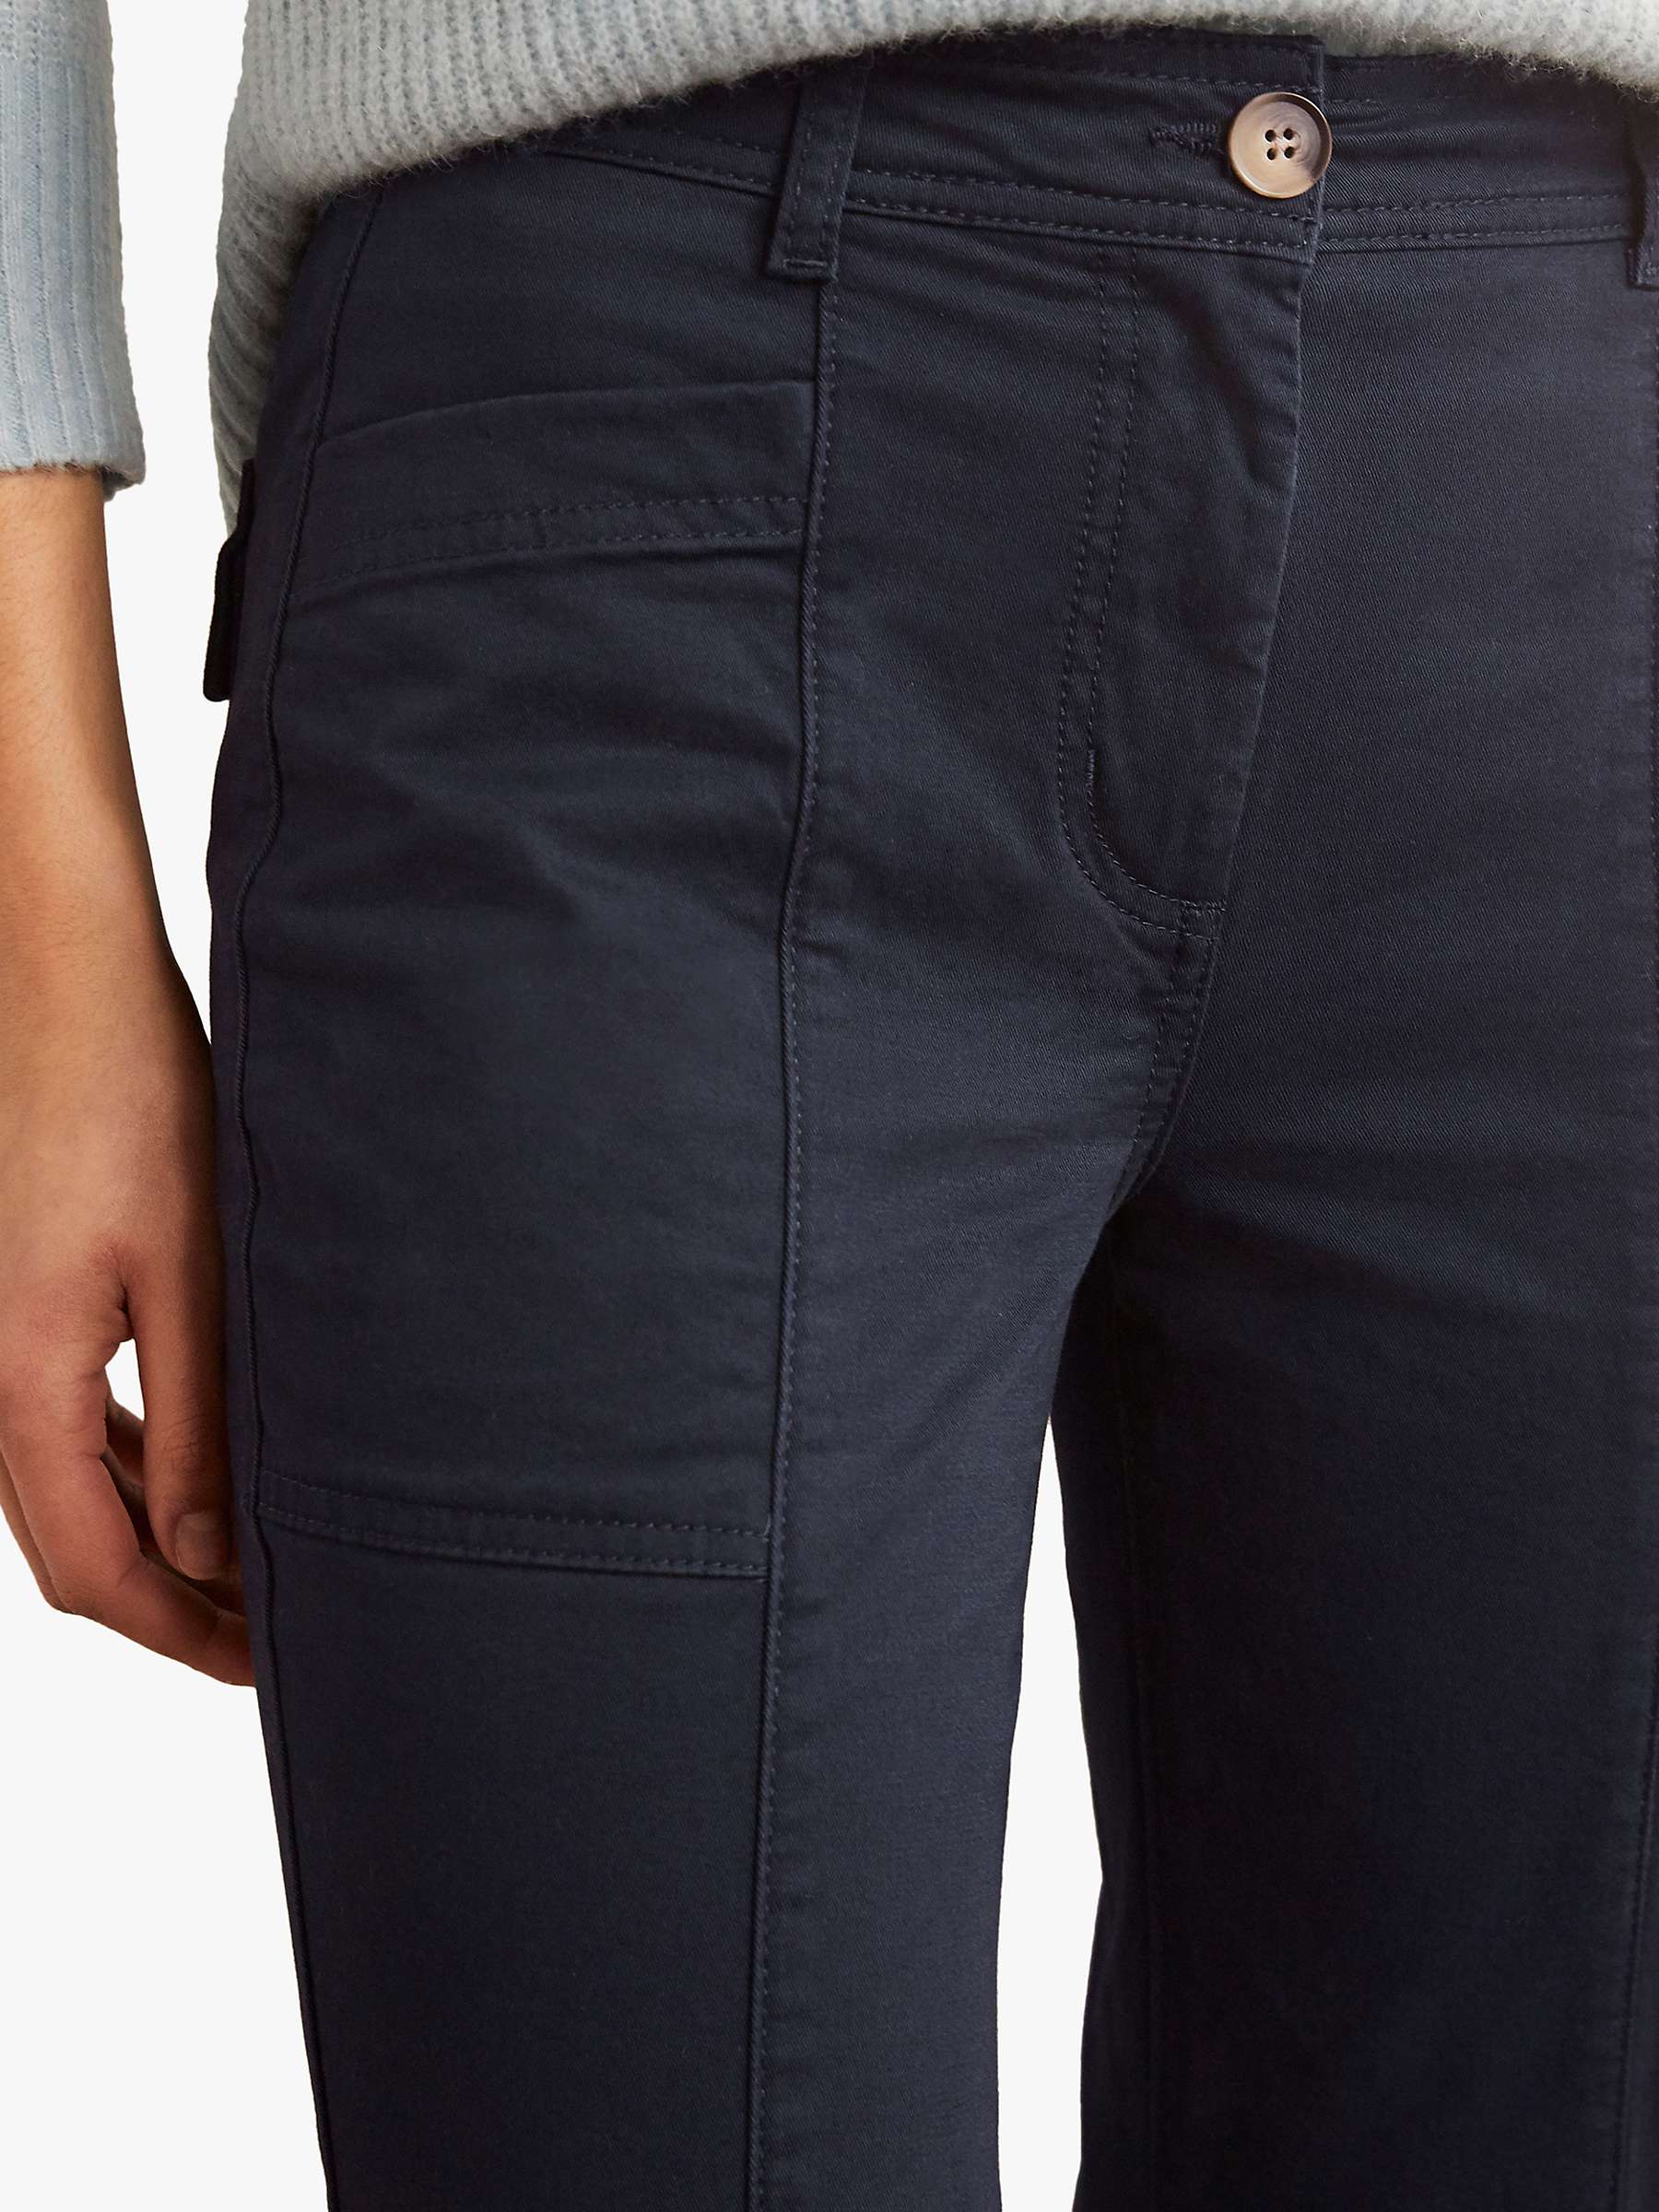 Buy Boden Abingdon Chino Trousers, Navy Online at johnlewis.com